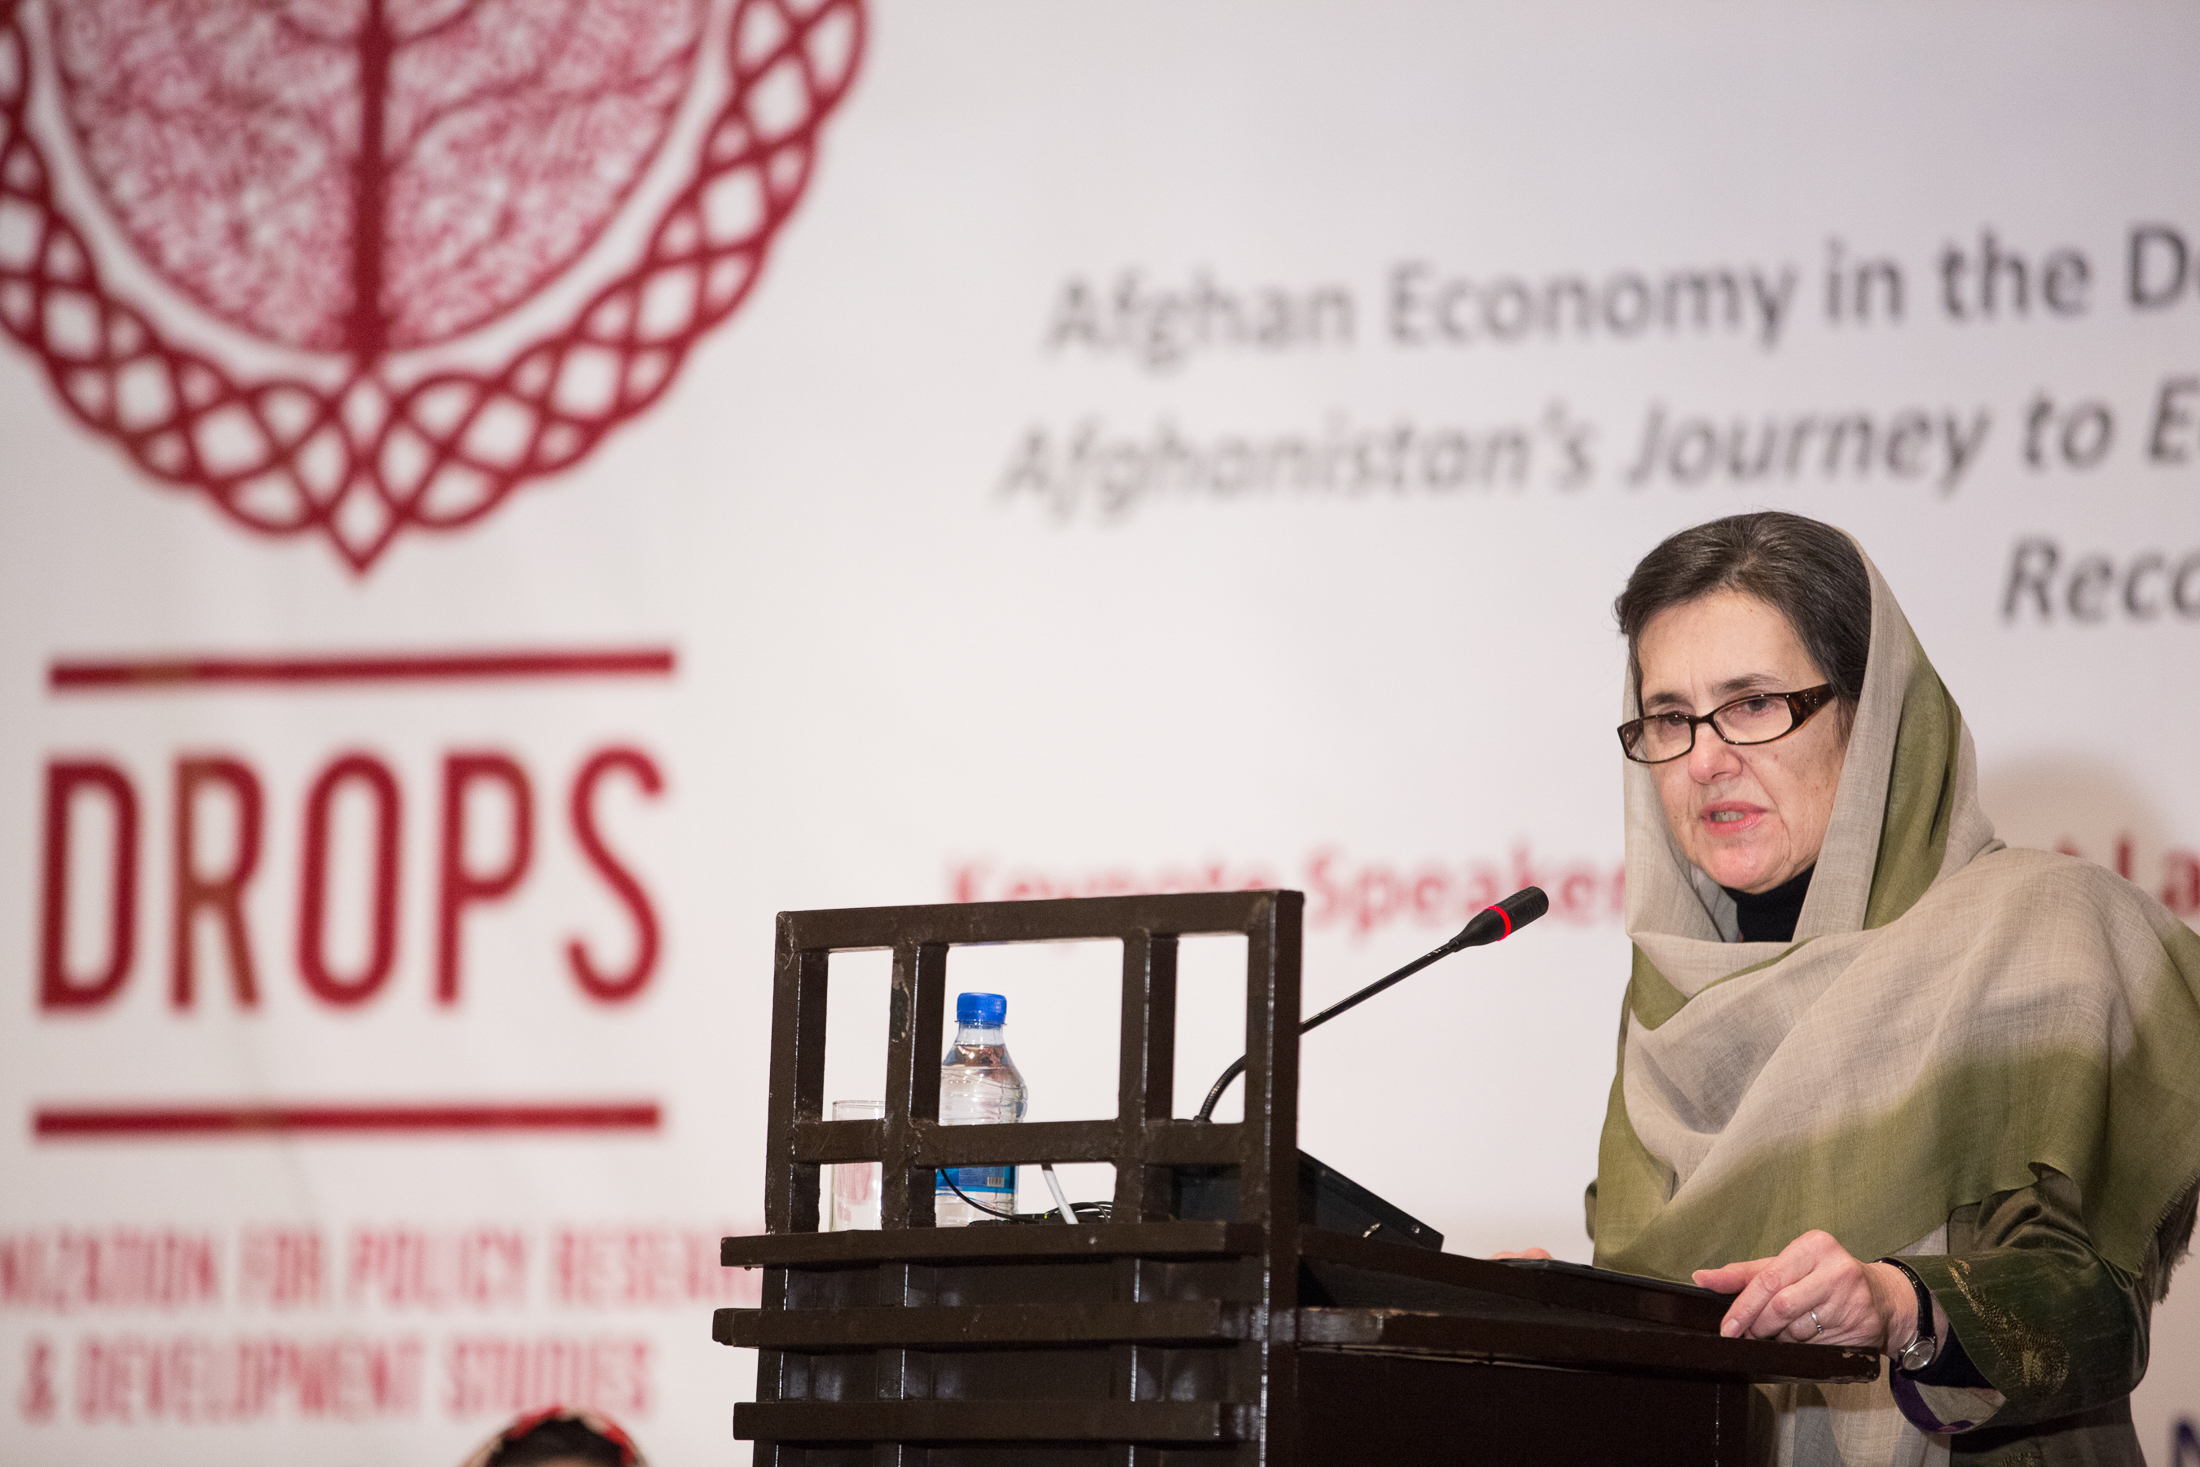 H.E. First Lady Rula Ghani Launches 2nd Women and Public Policy Journal-2016